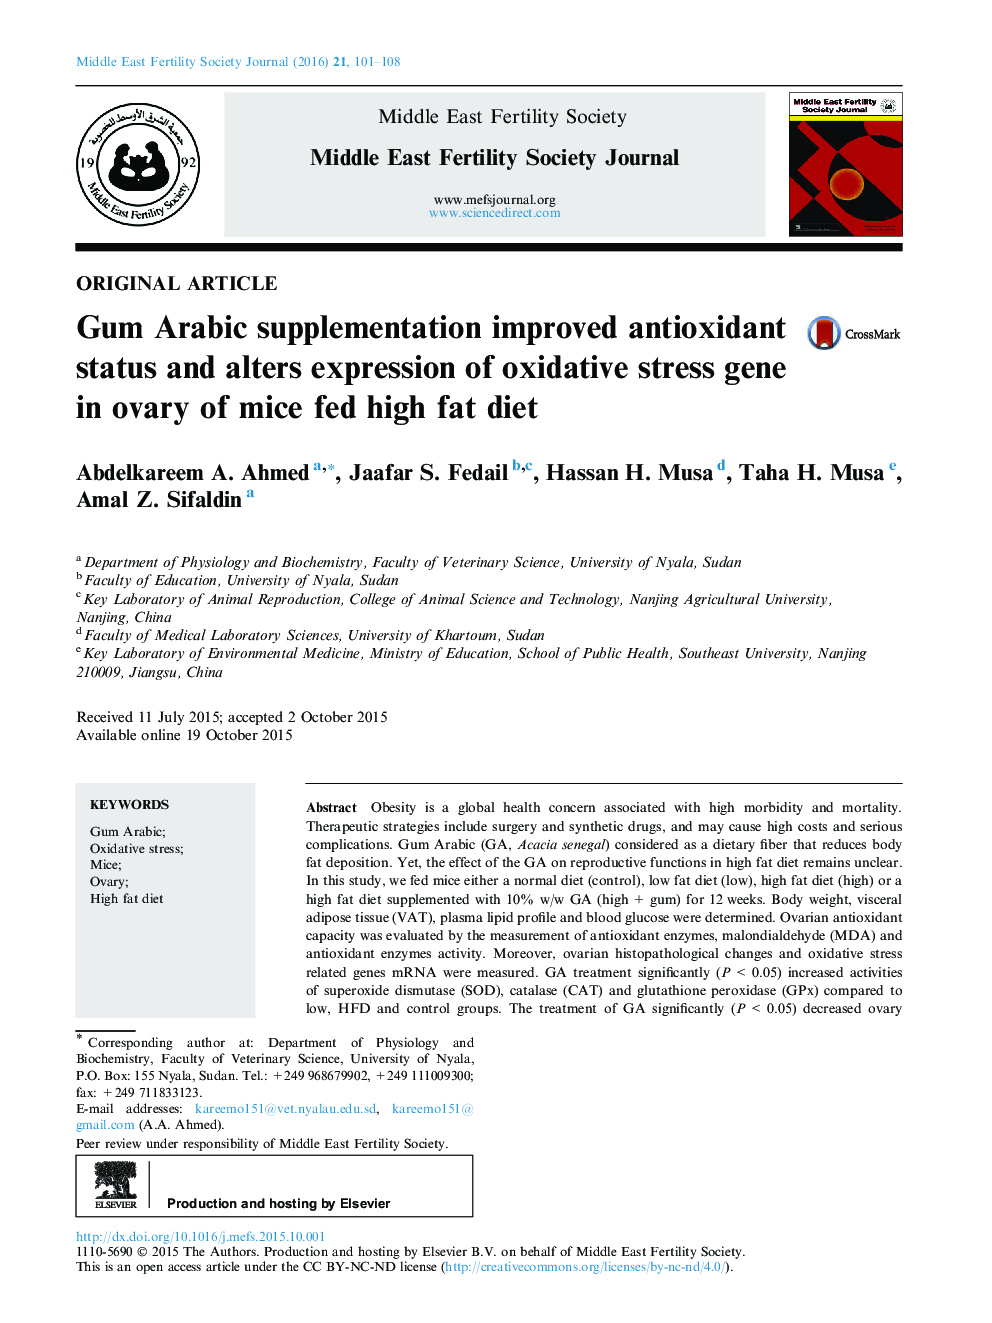 Gum Arabic supplementation improved antioxidant status and alters expression of oxidative stress gene in ovary of mice fed high fat diet 